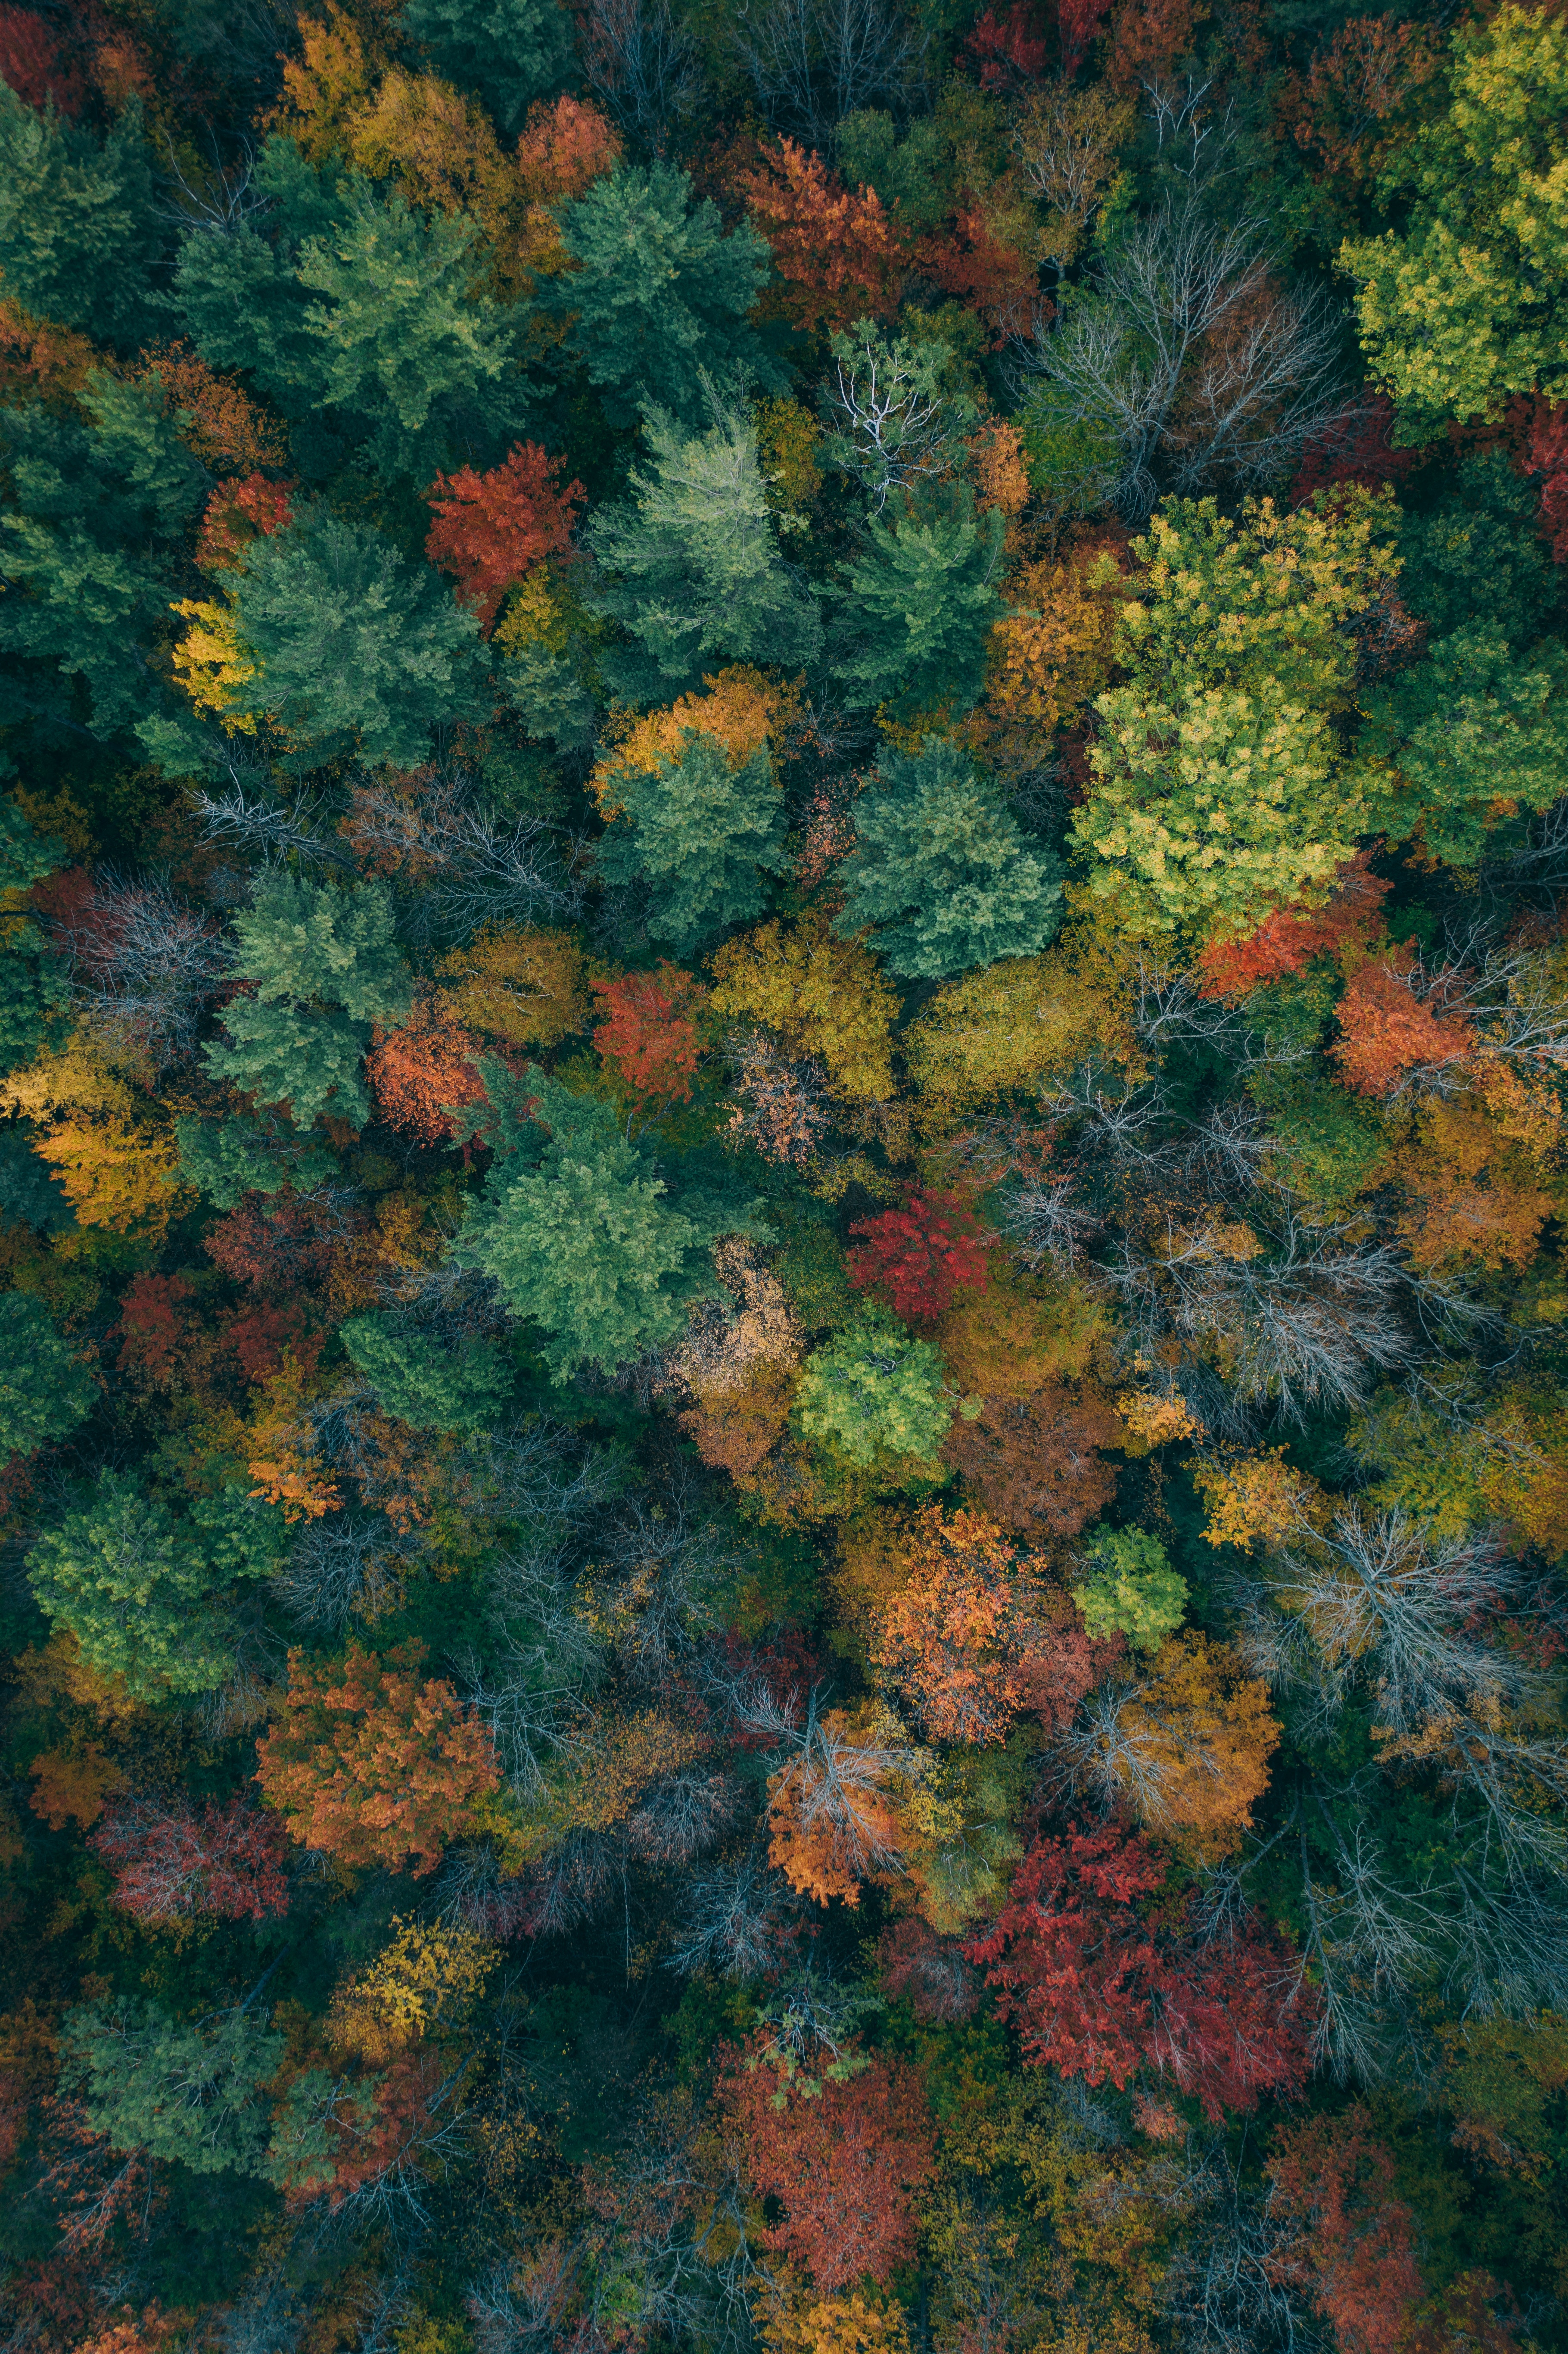 HD wallpaper colorful, forest, nature, autumn colors, autumn, autumn paints, trees, view from above, colourful